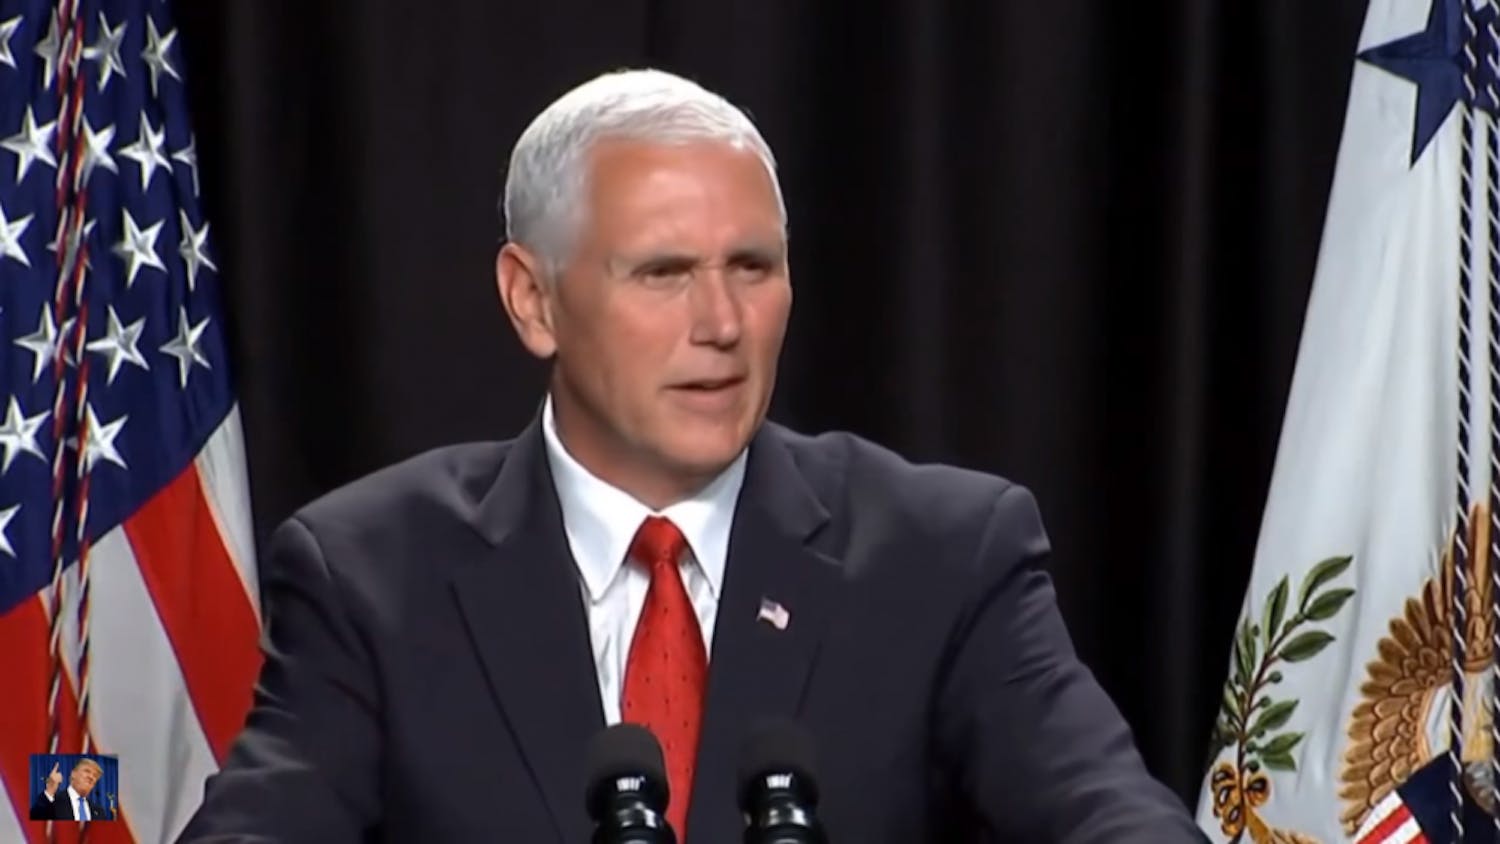 Vice President Mike Pence addressed high school students in Kerwin Hall on Wednesday.